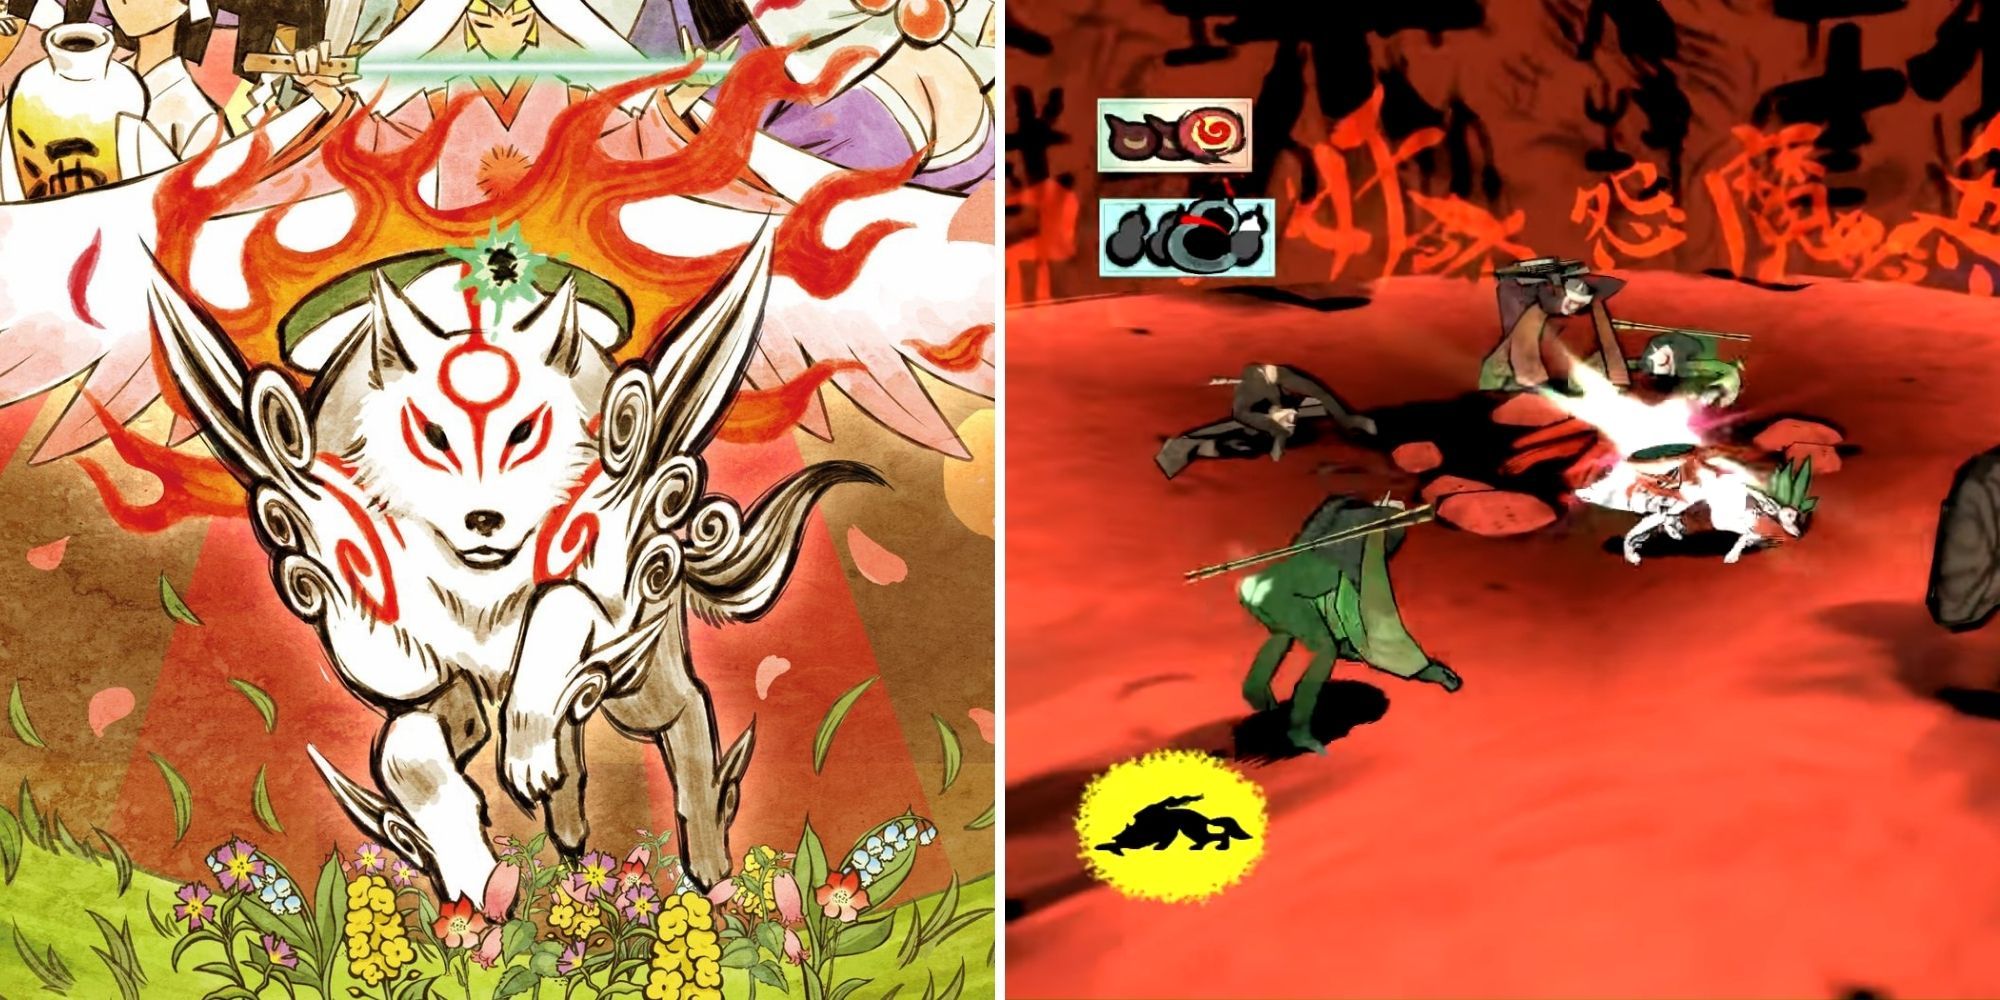 Okami Key Art, next to a picture of Ammeterasu in Combat with Demonic Imps